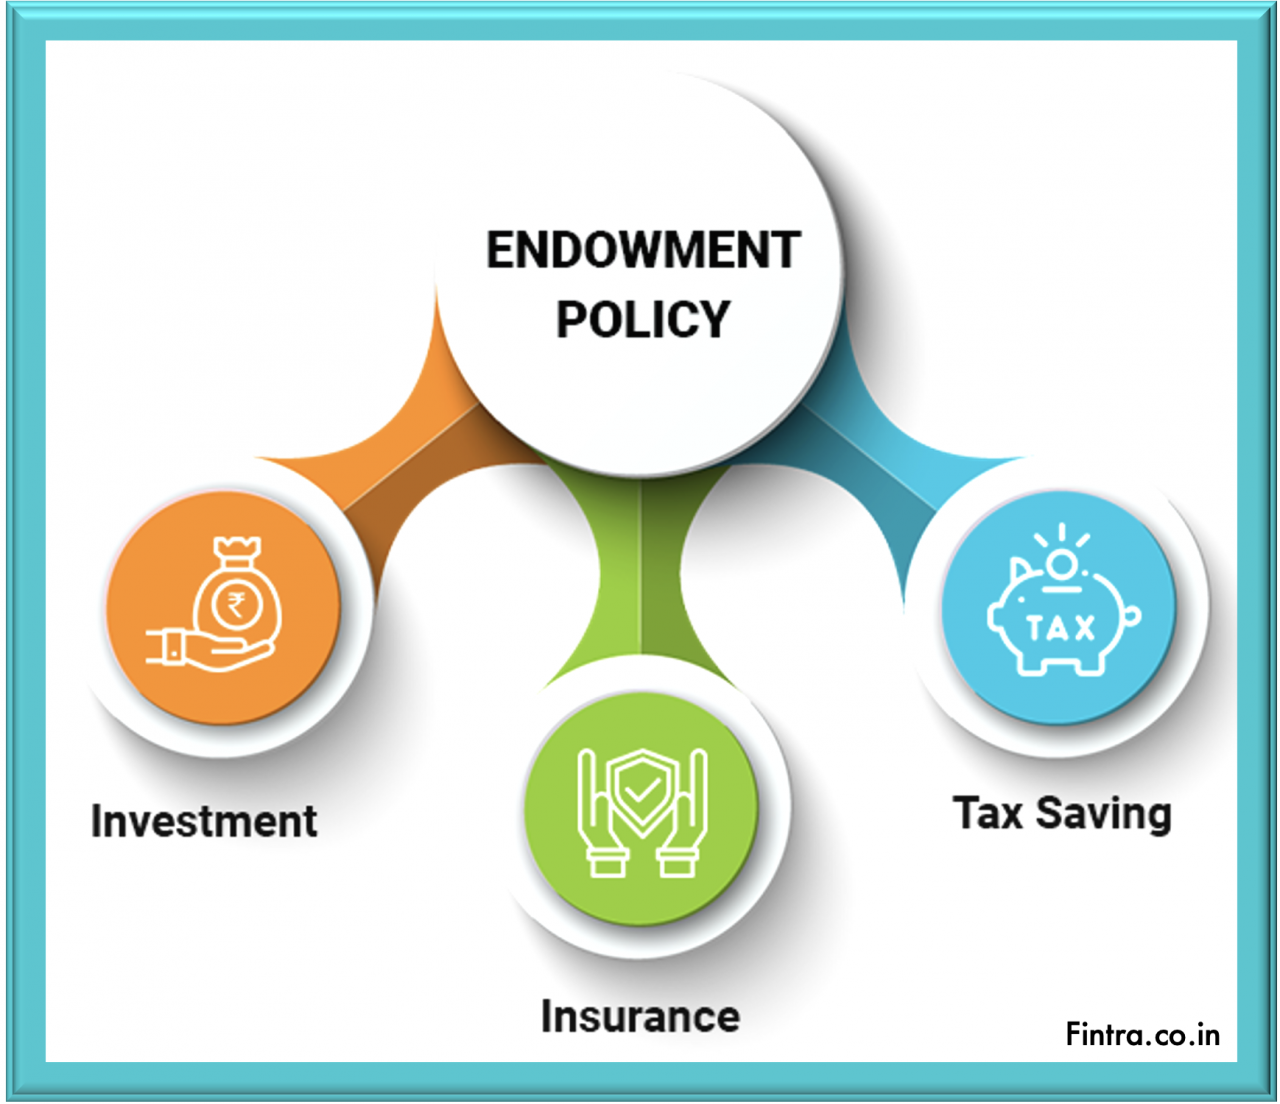 Do you pay tax when an endowment policy matures